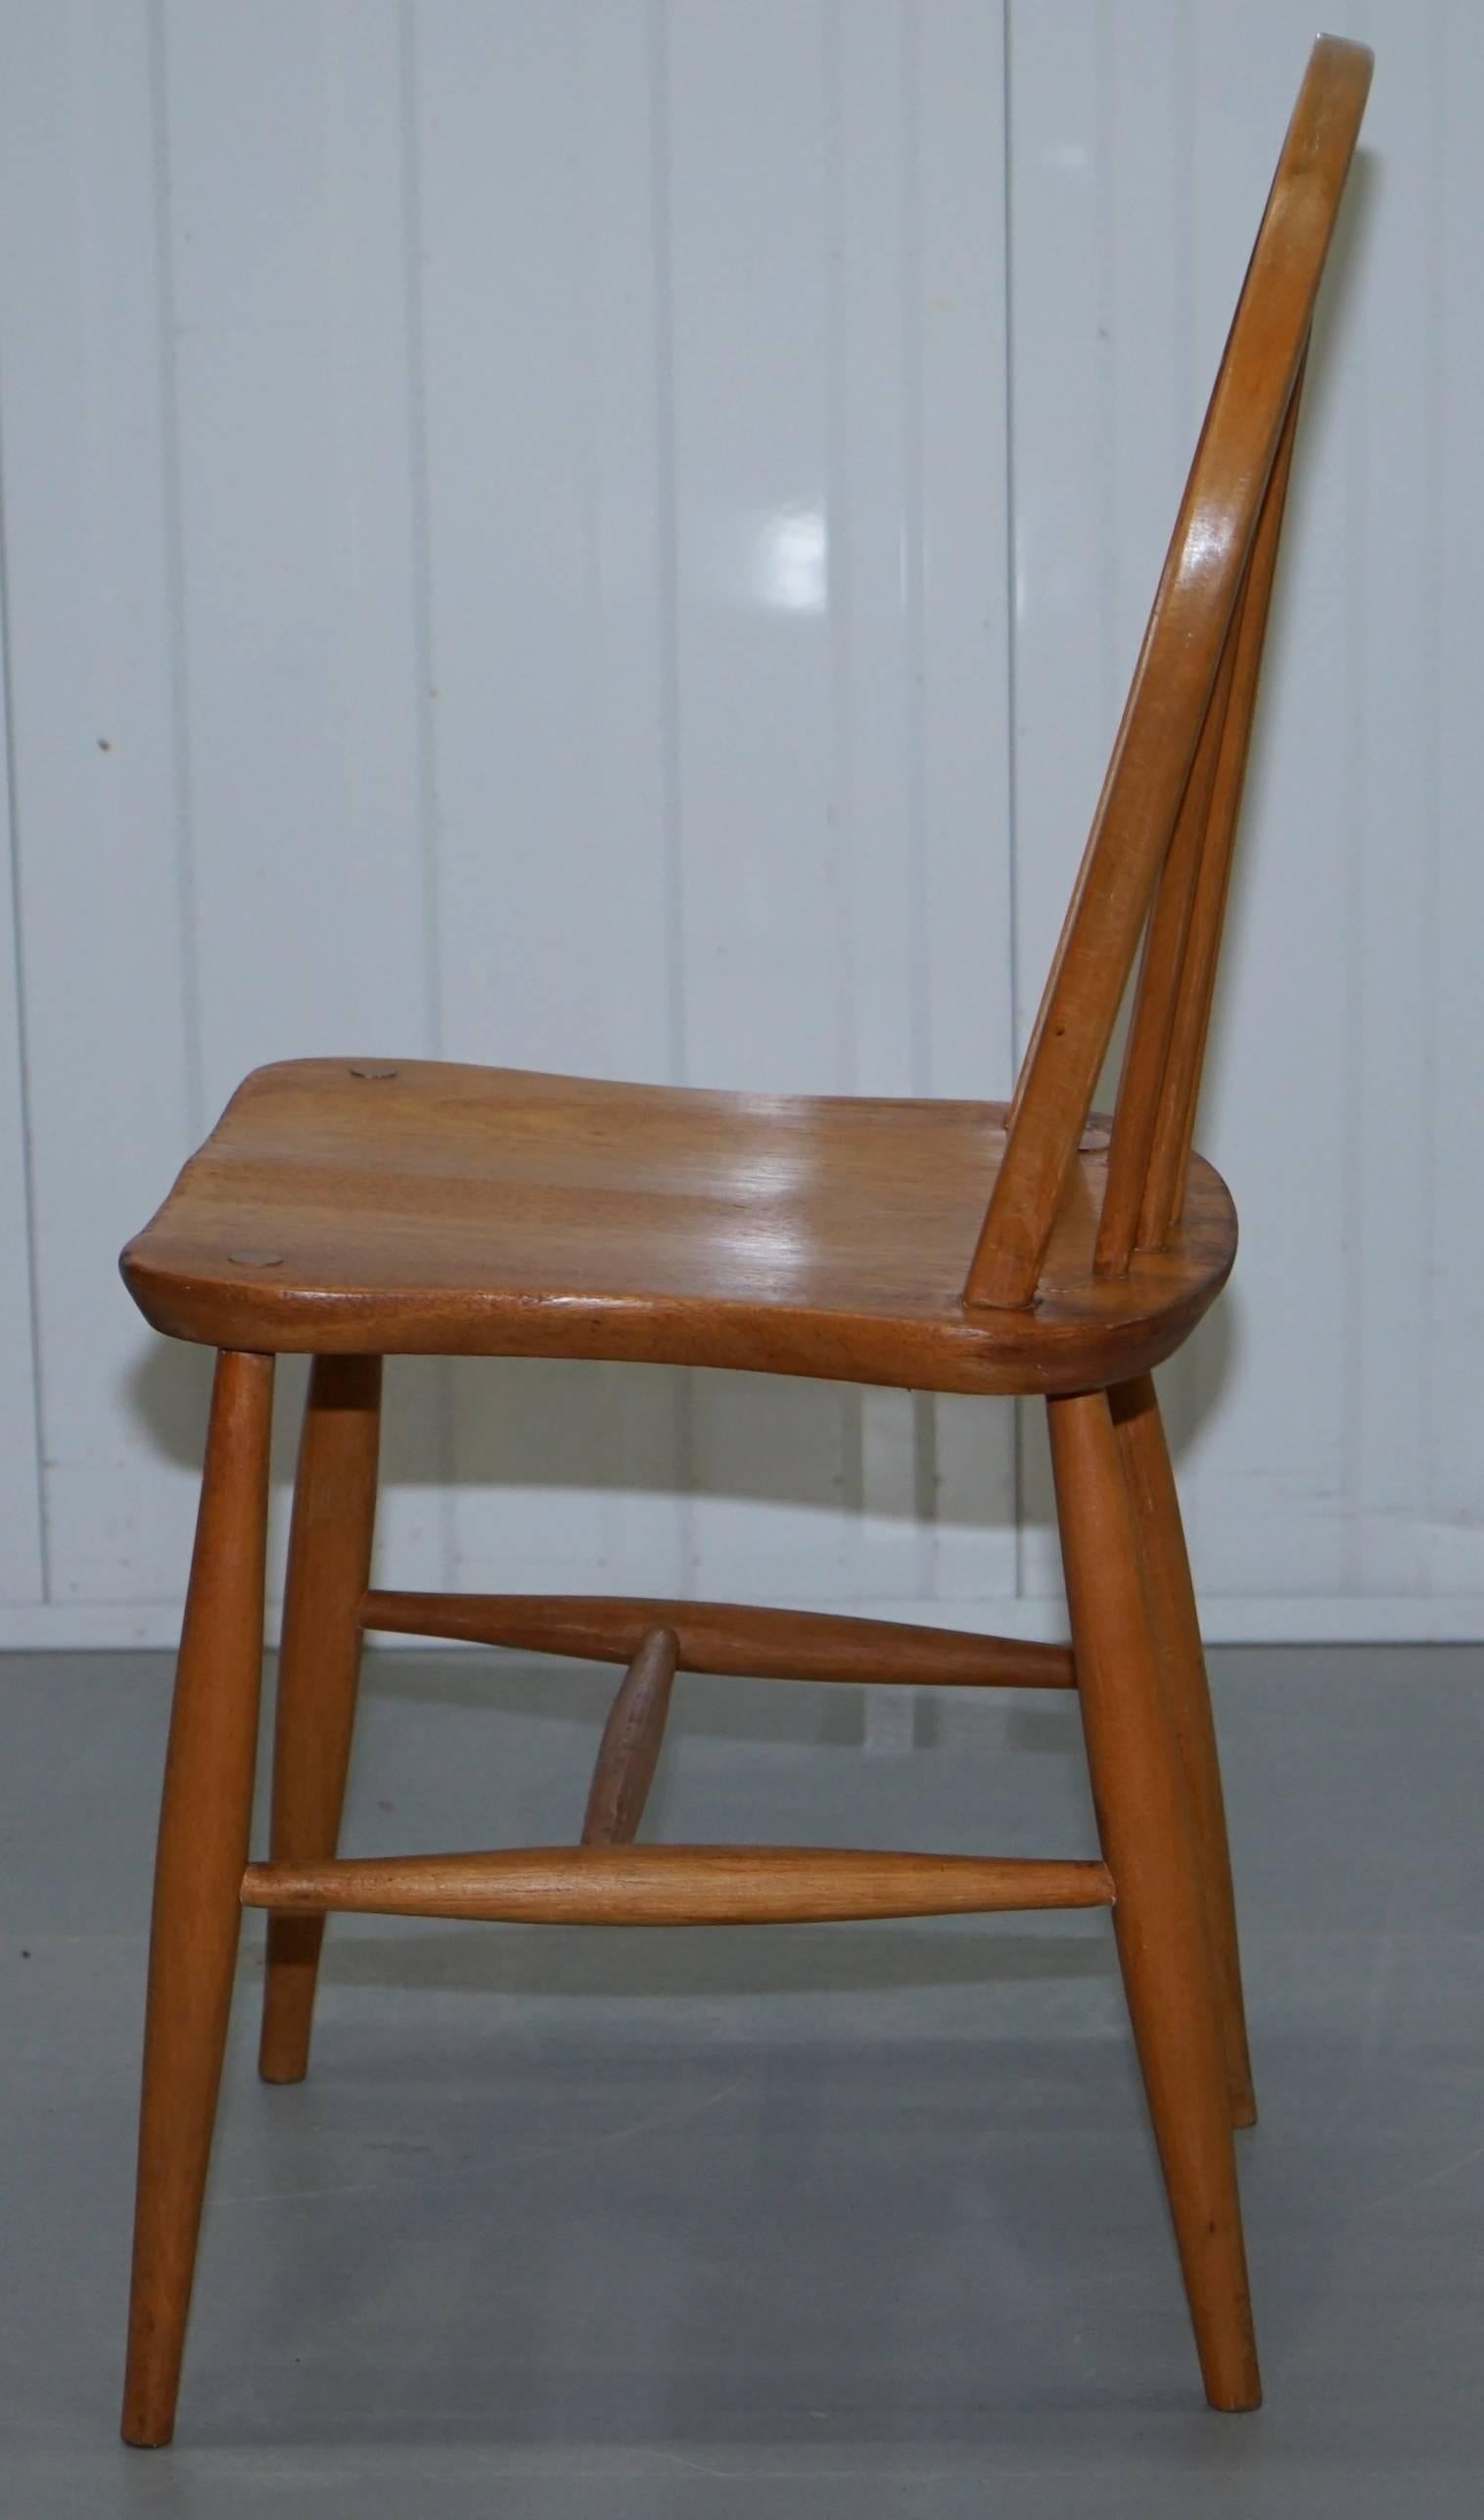 Hand-Crafted Pair of Original Ercol Productions Windsor Dining Chairs Spindle